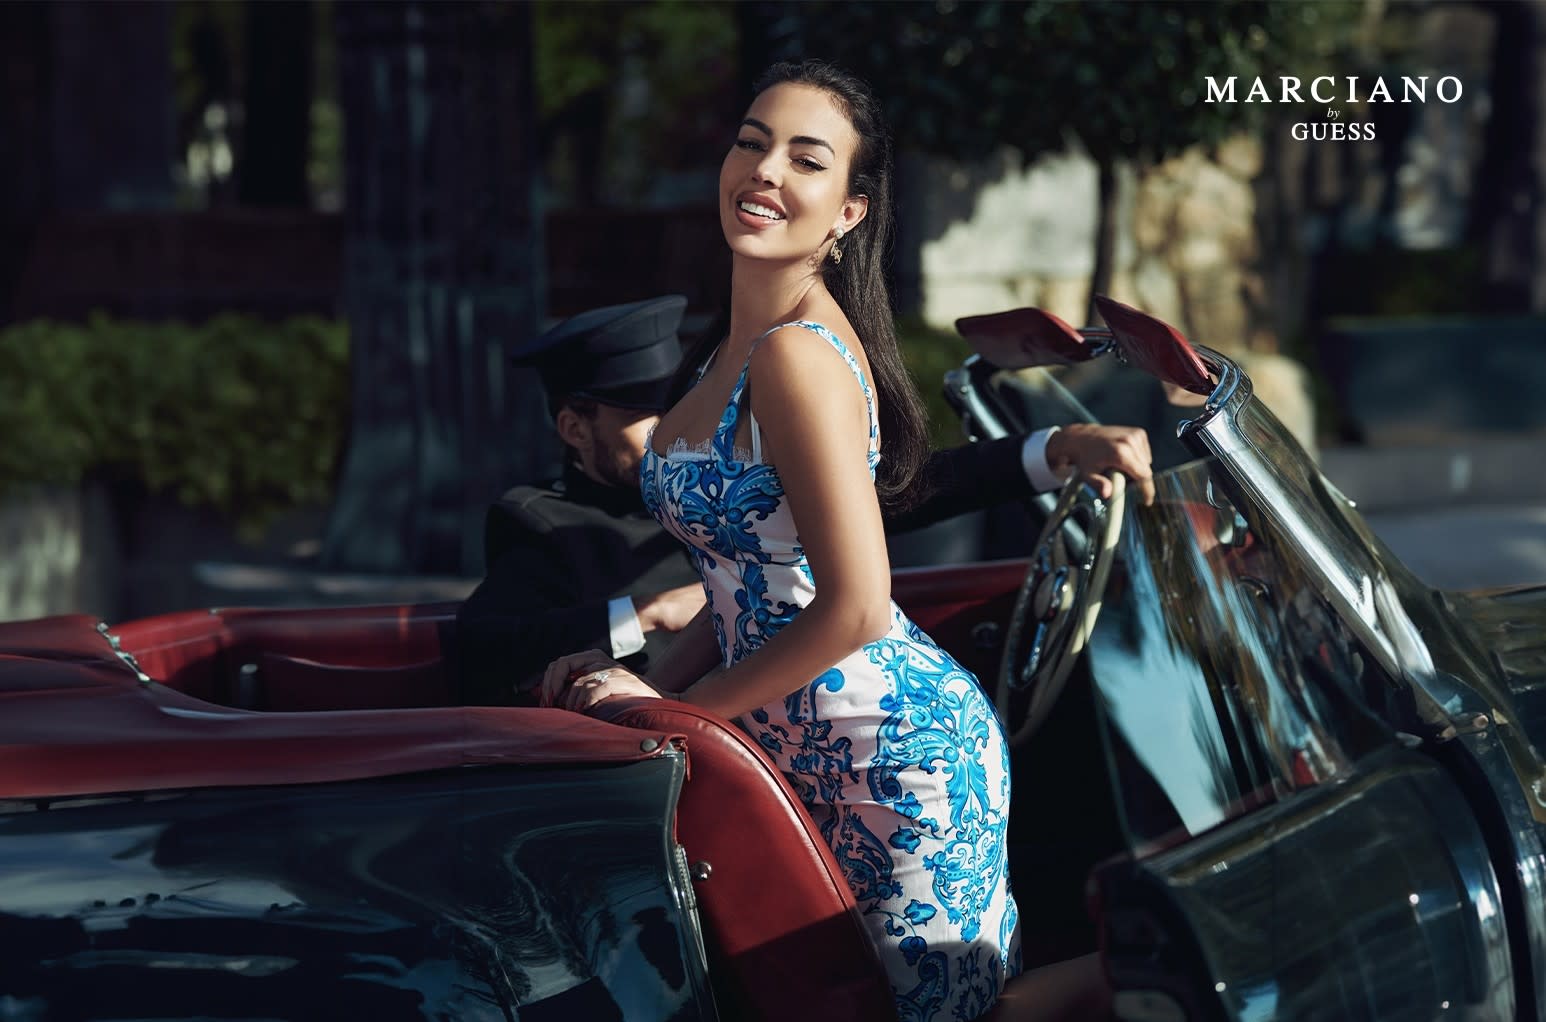 Shop Marciano by GUESS with one-of-a-kind European designs at dream prices. It’s our best kept luxury secret.